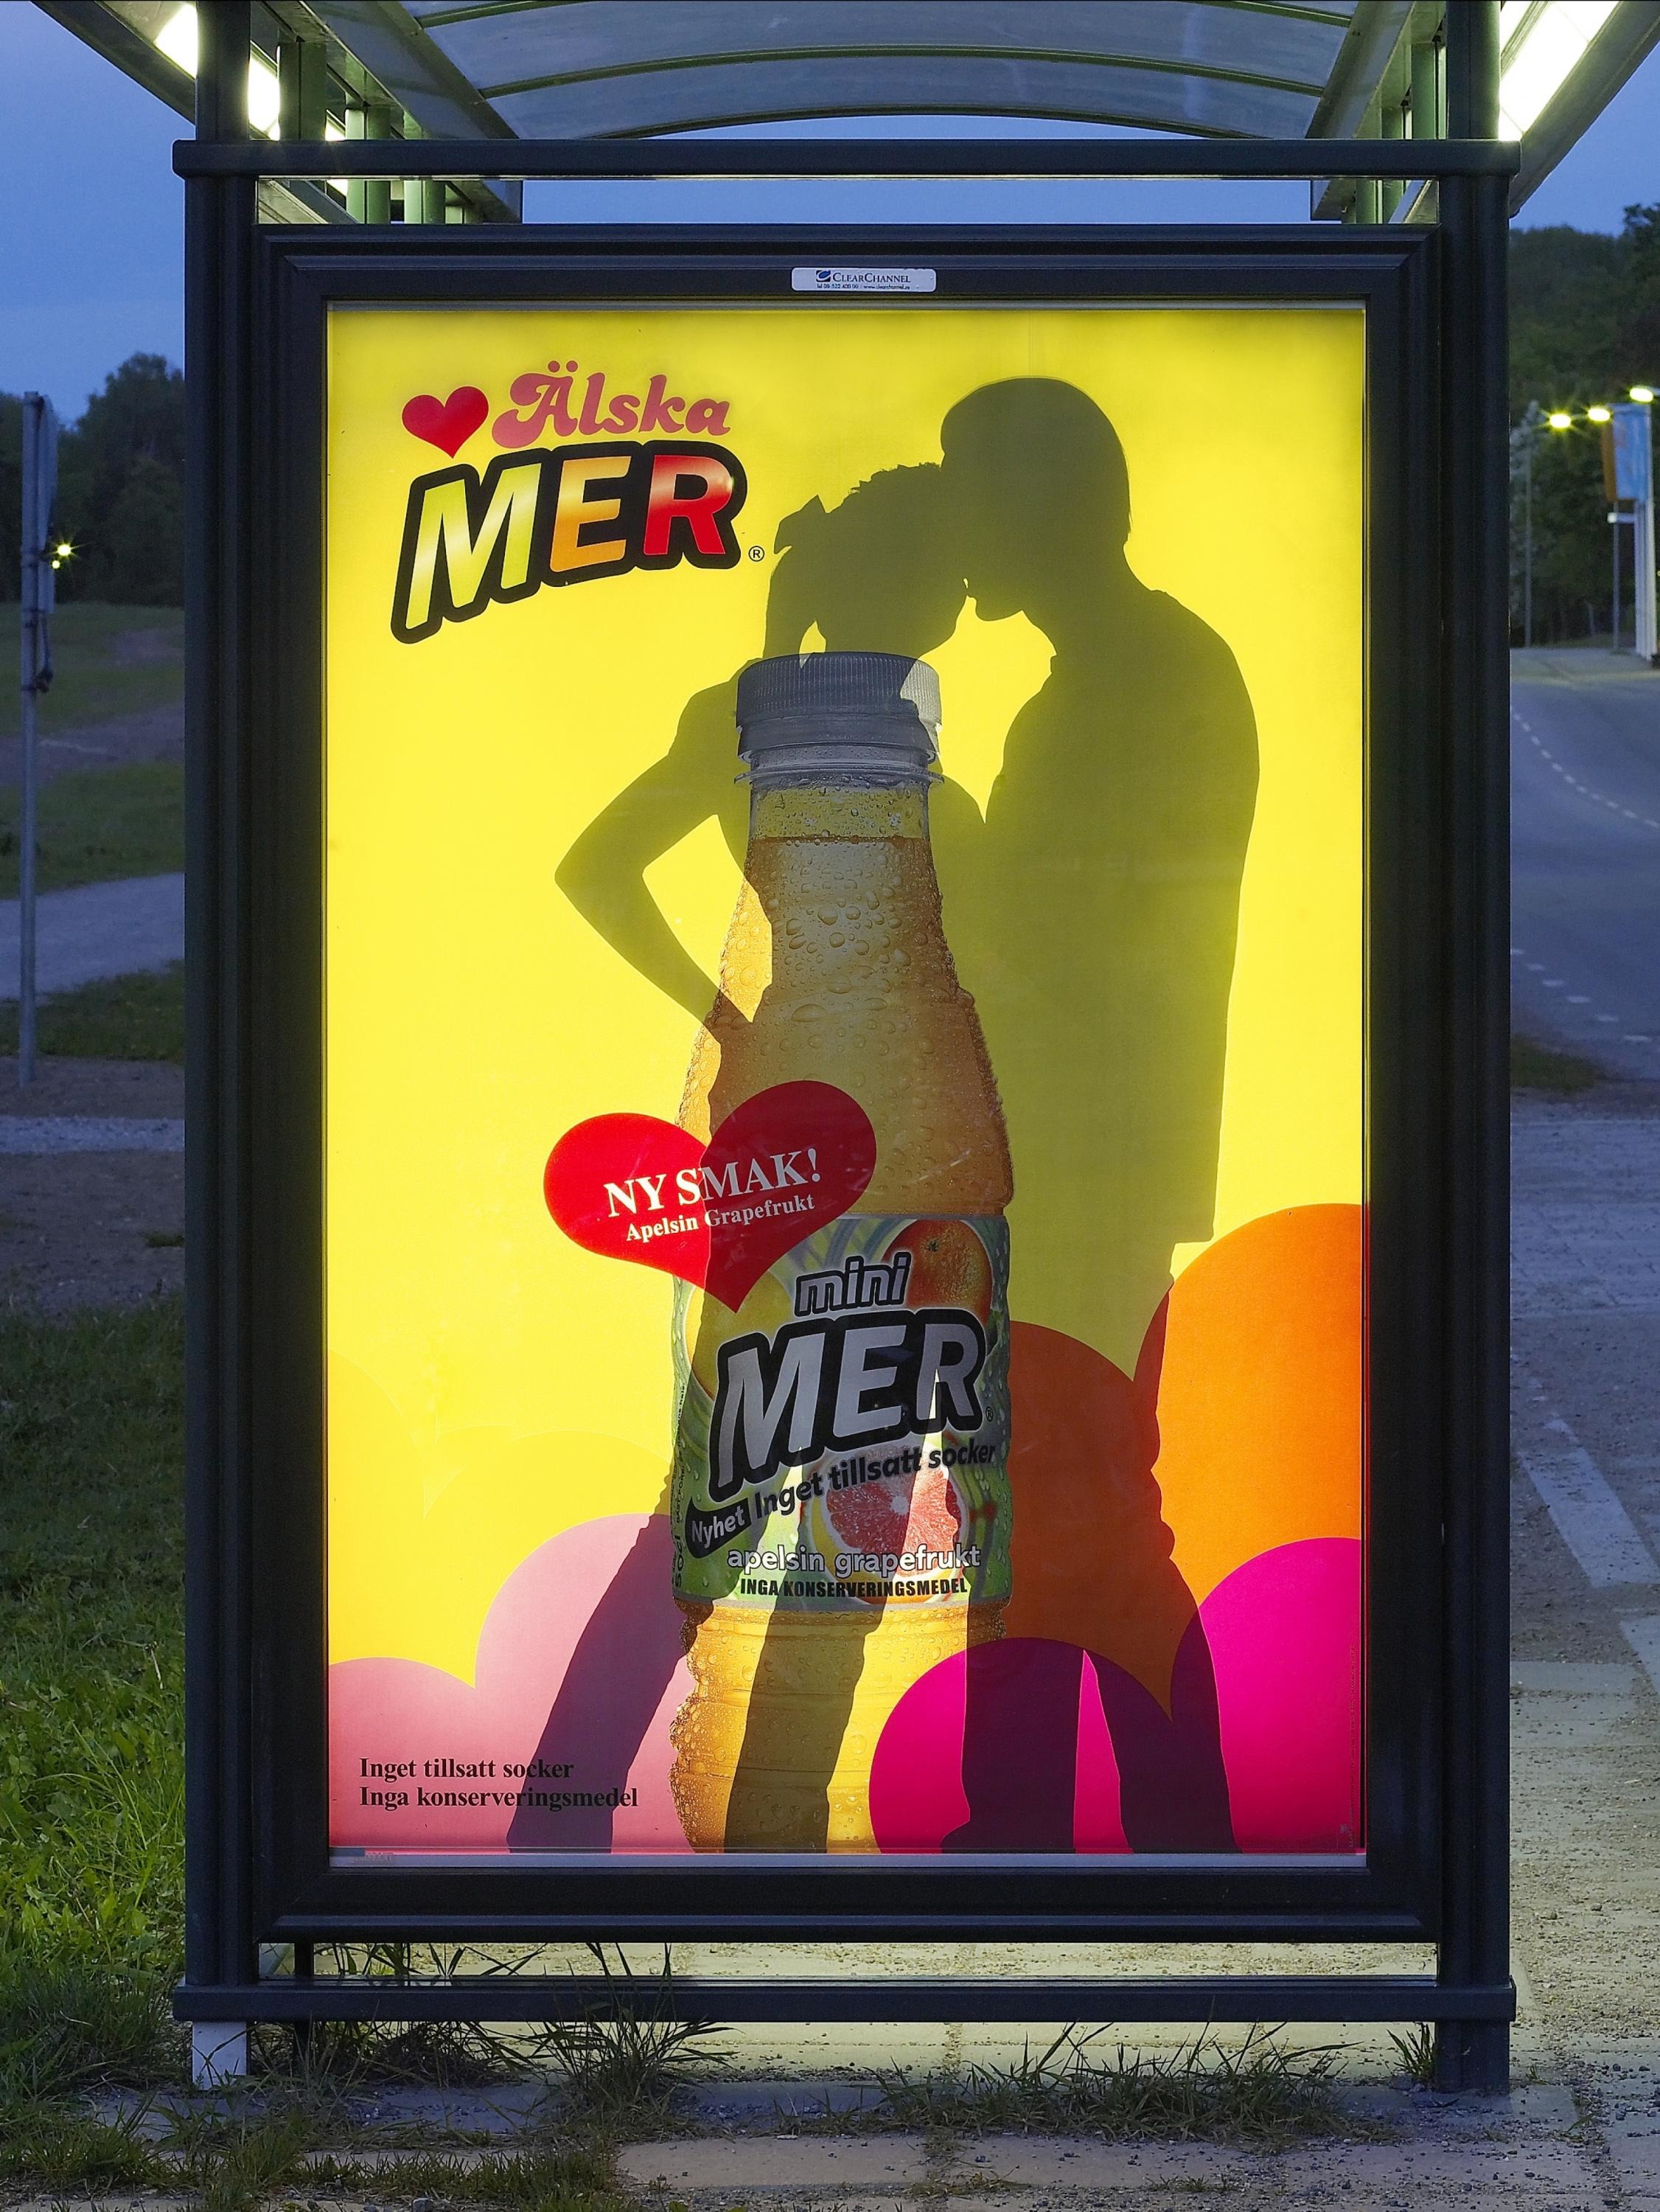 MER NON-CARBONATED SOFT DRINK